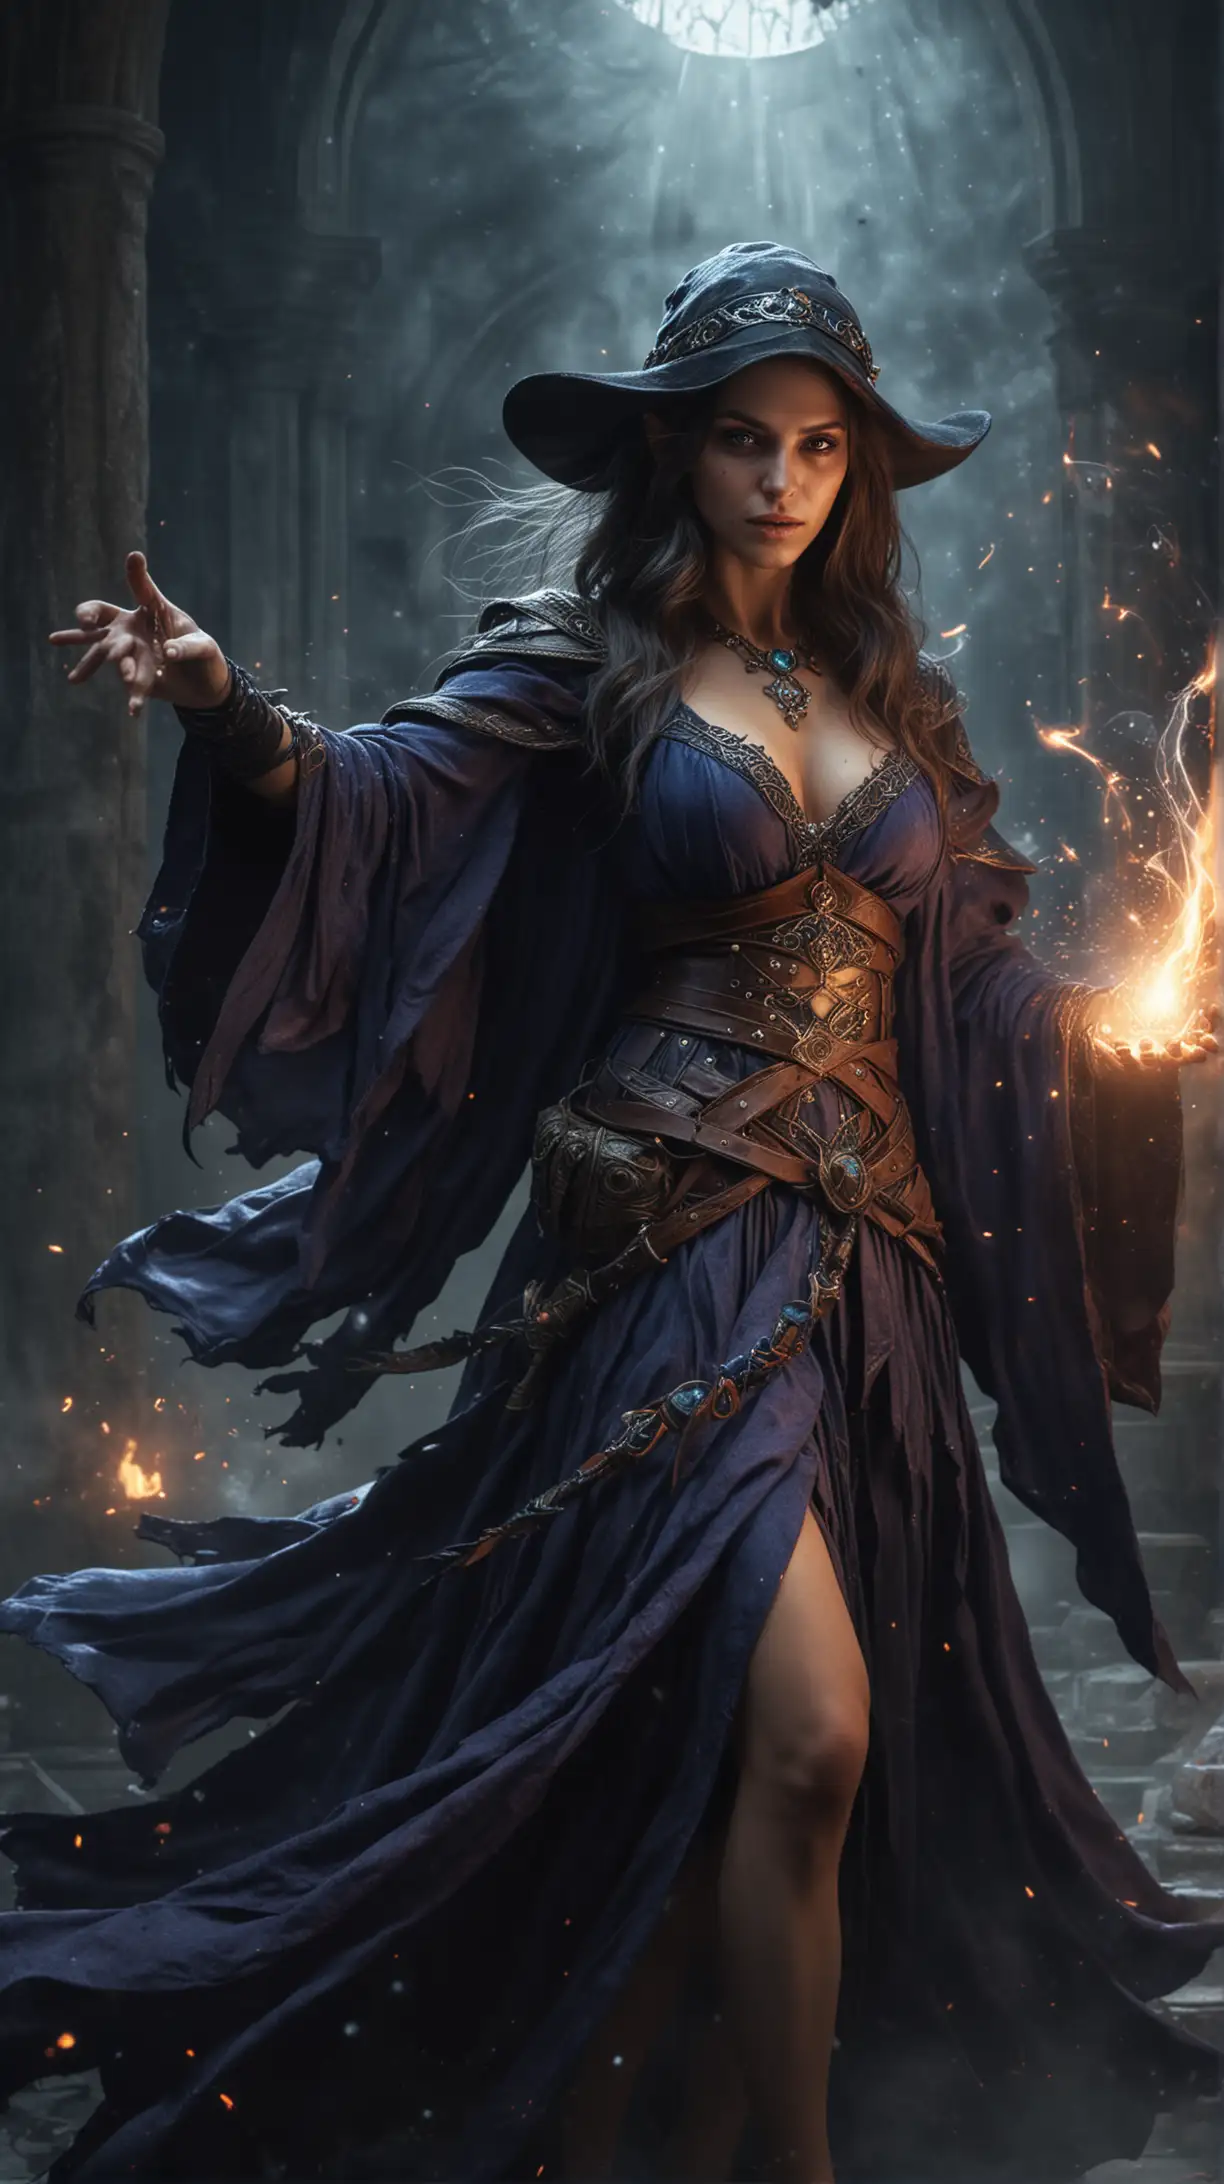 Mystical Sorceress Casting Spell in Magic Duel with Evil Spirit